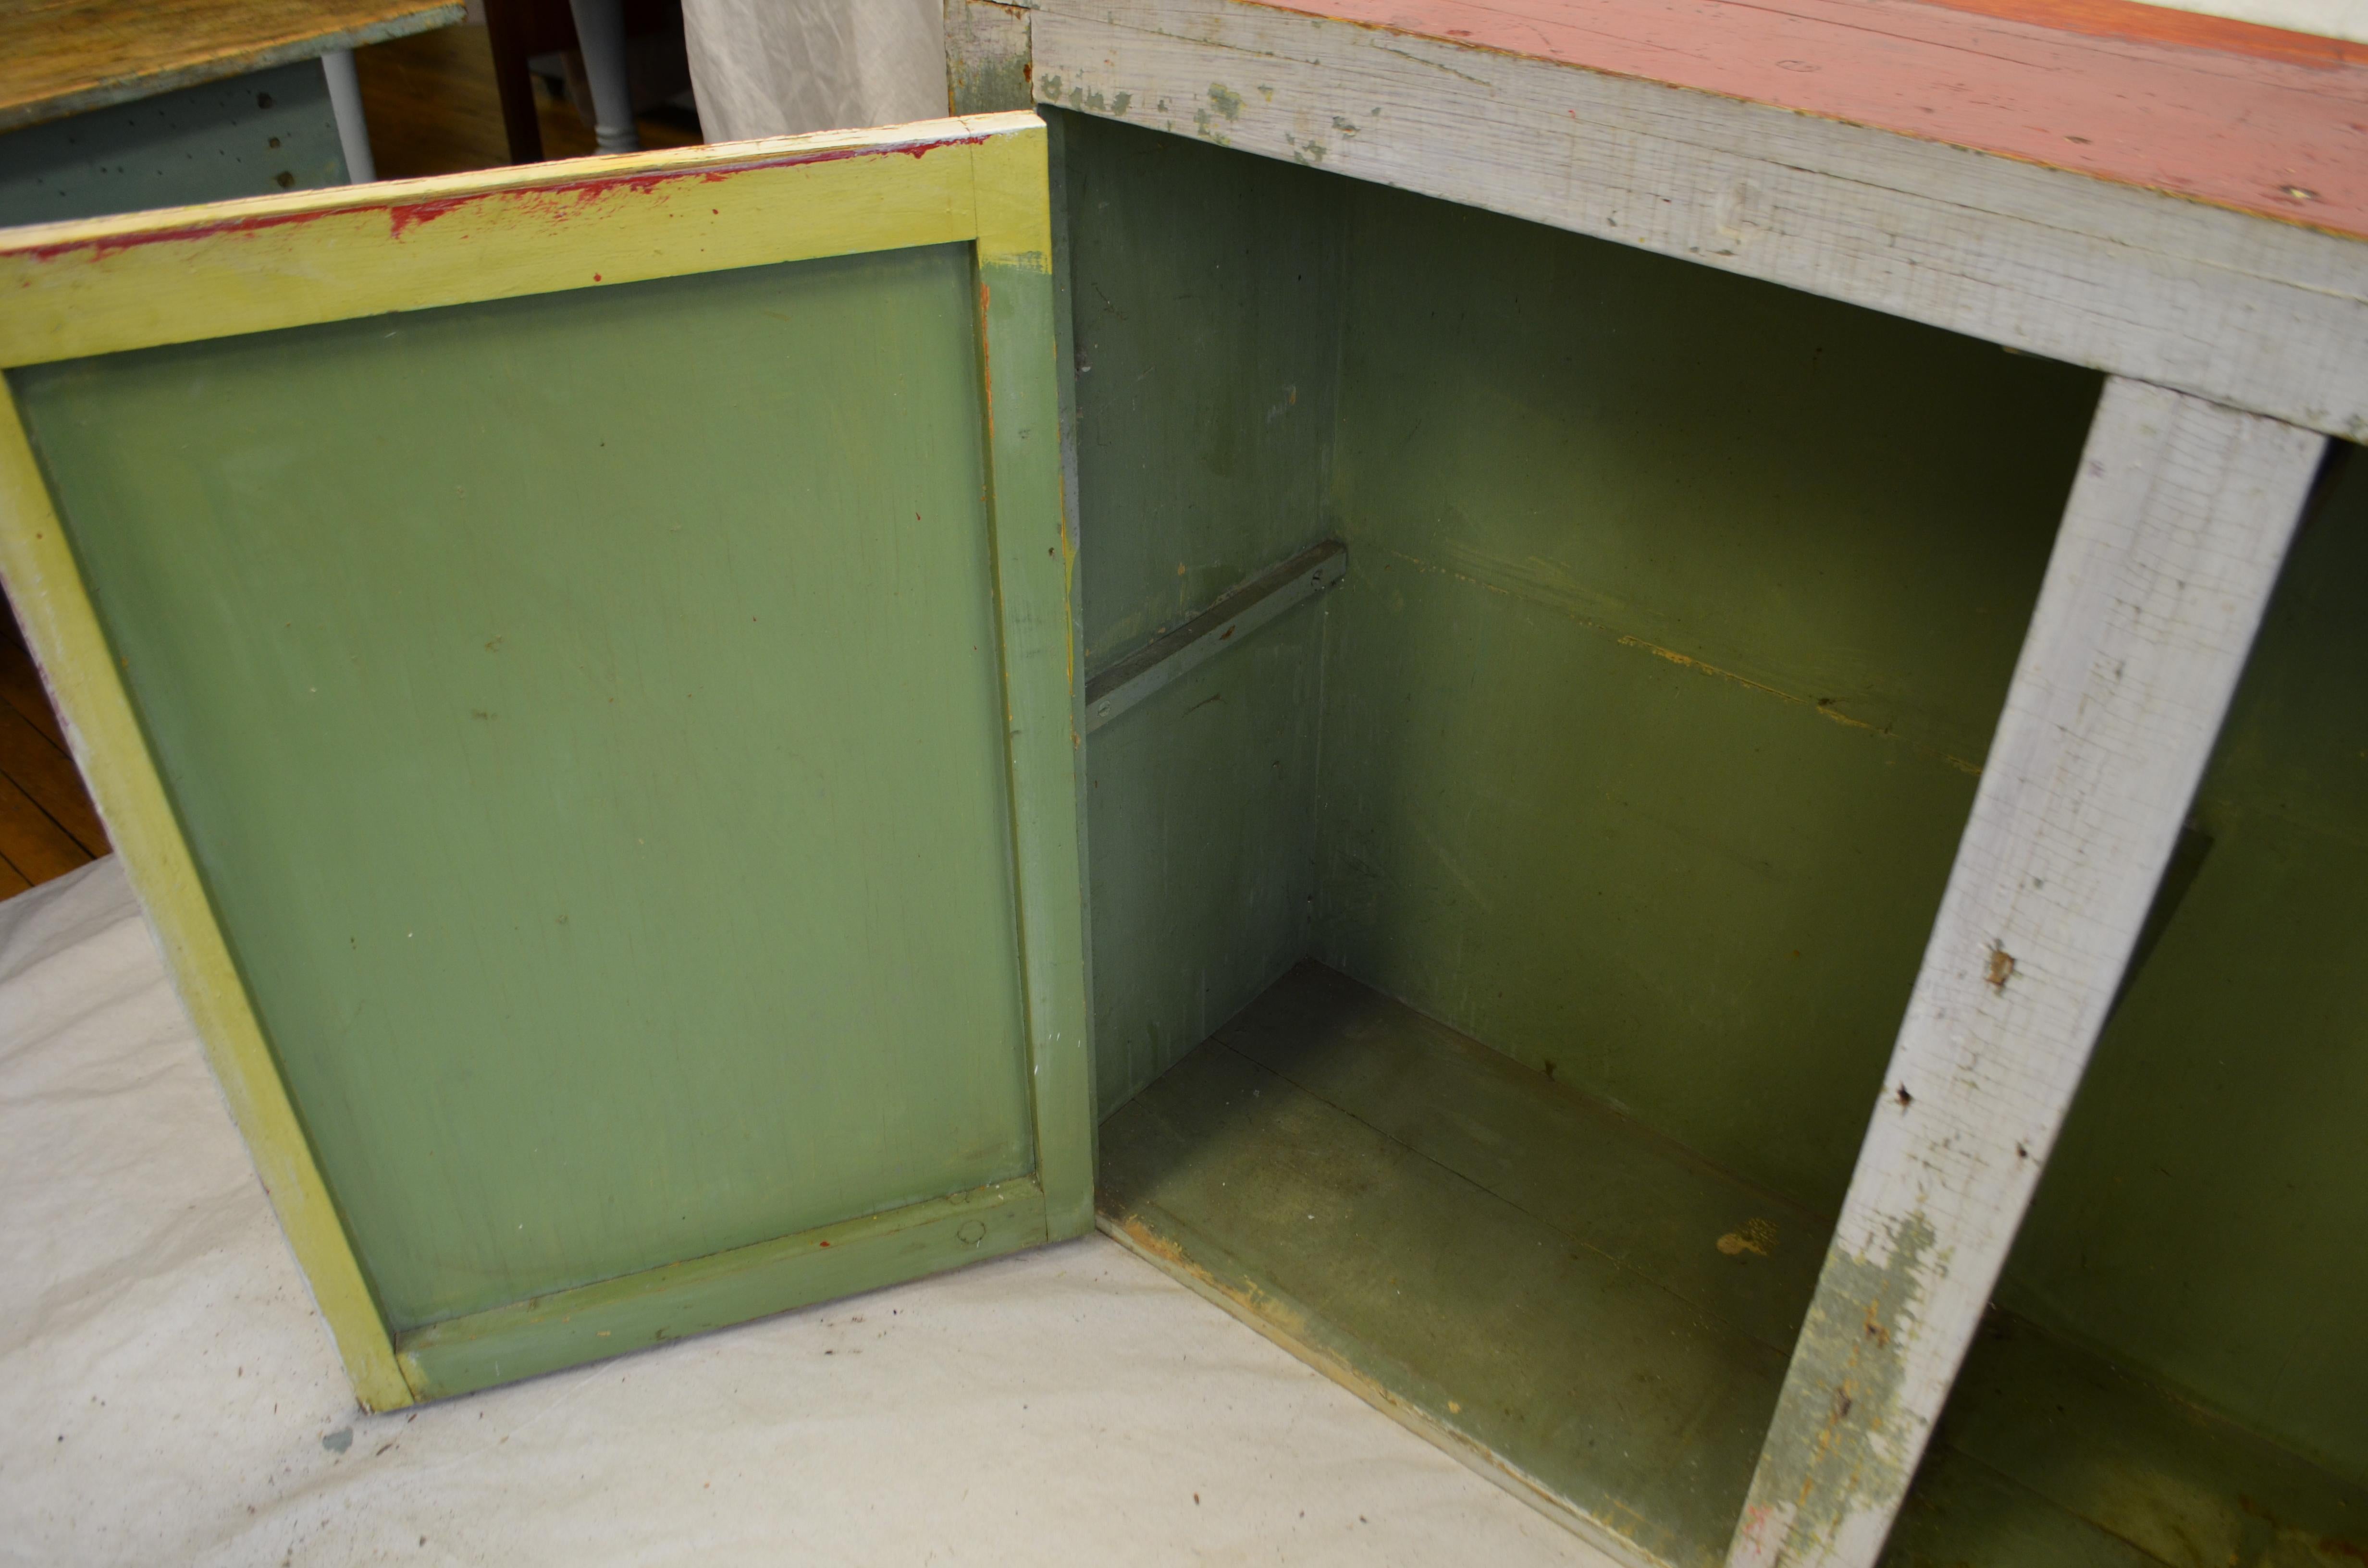 20th Century Cupboard Freestanding from Mid-1900s for Hallway, Kitchen or Entranceway Storage